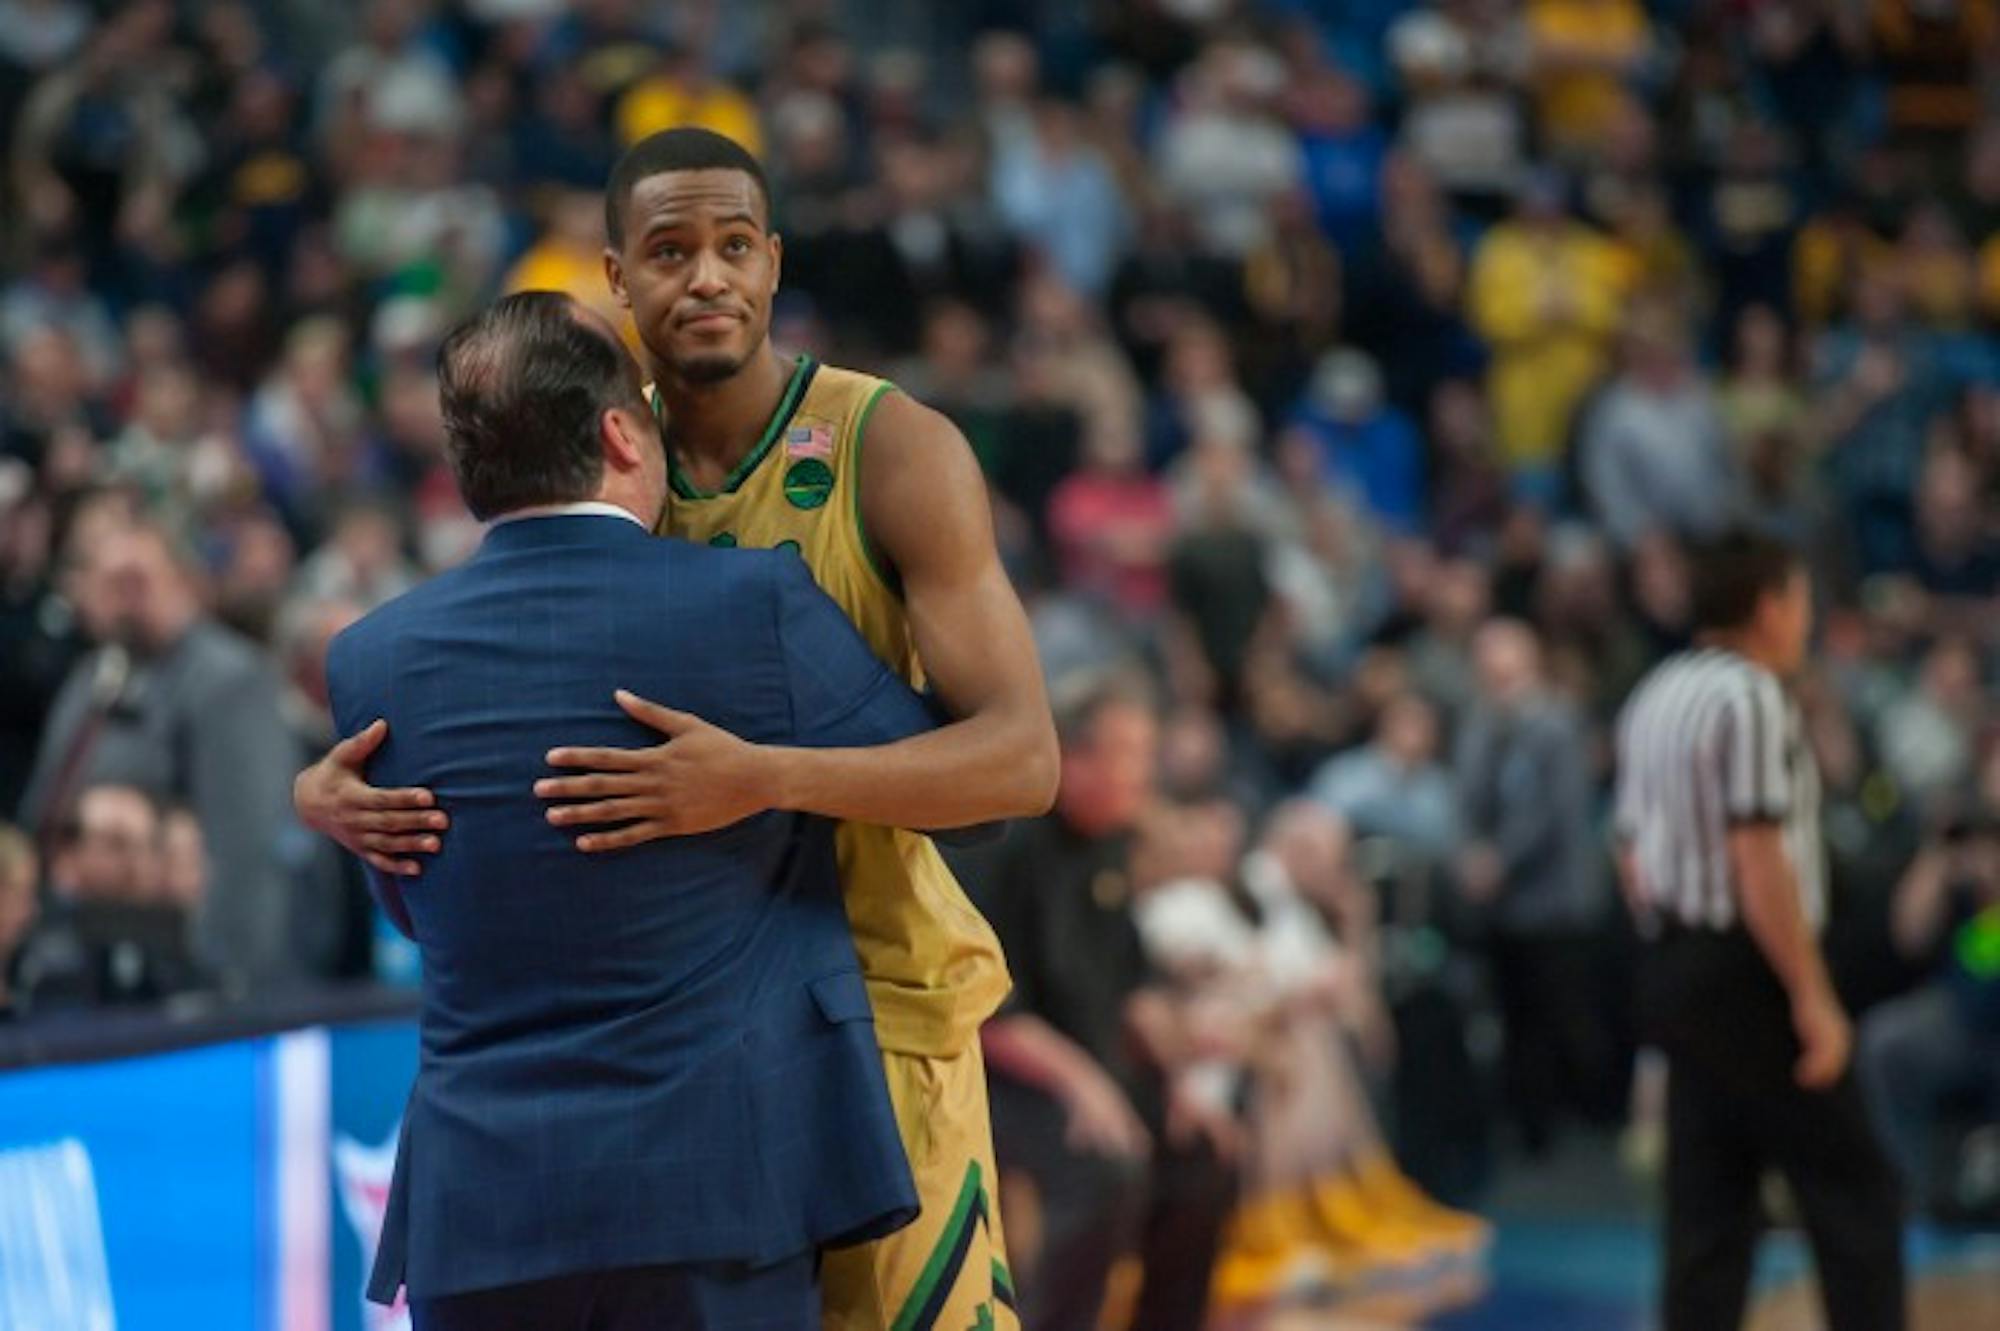 Irish senior forward V.J. Beachem hugs head coach Mike Brey in the final minutes of Notre Dame's 83-71 loss to West Virginia on Saturday at KeyBank Arena.